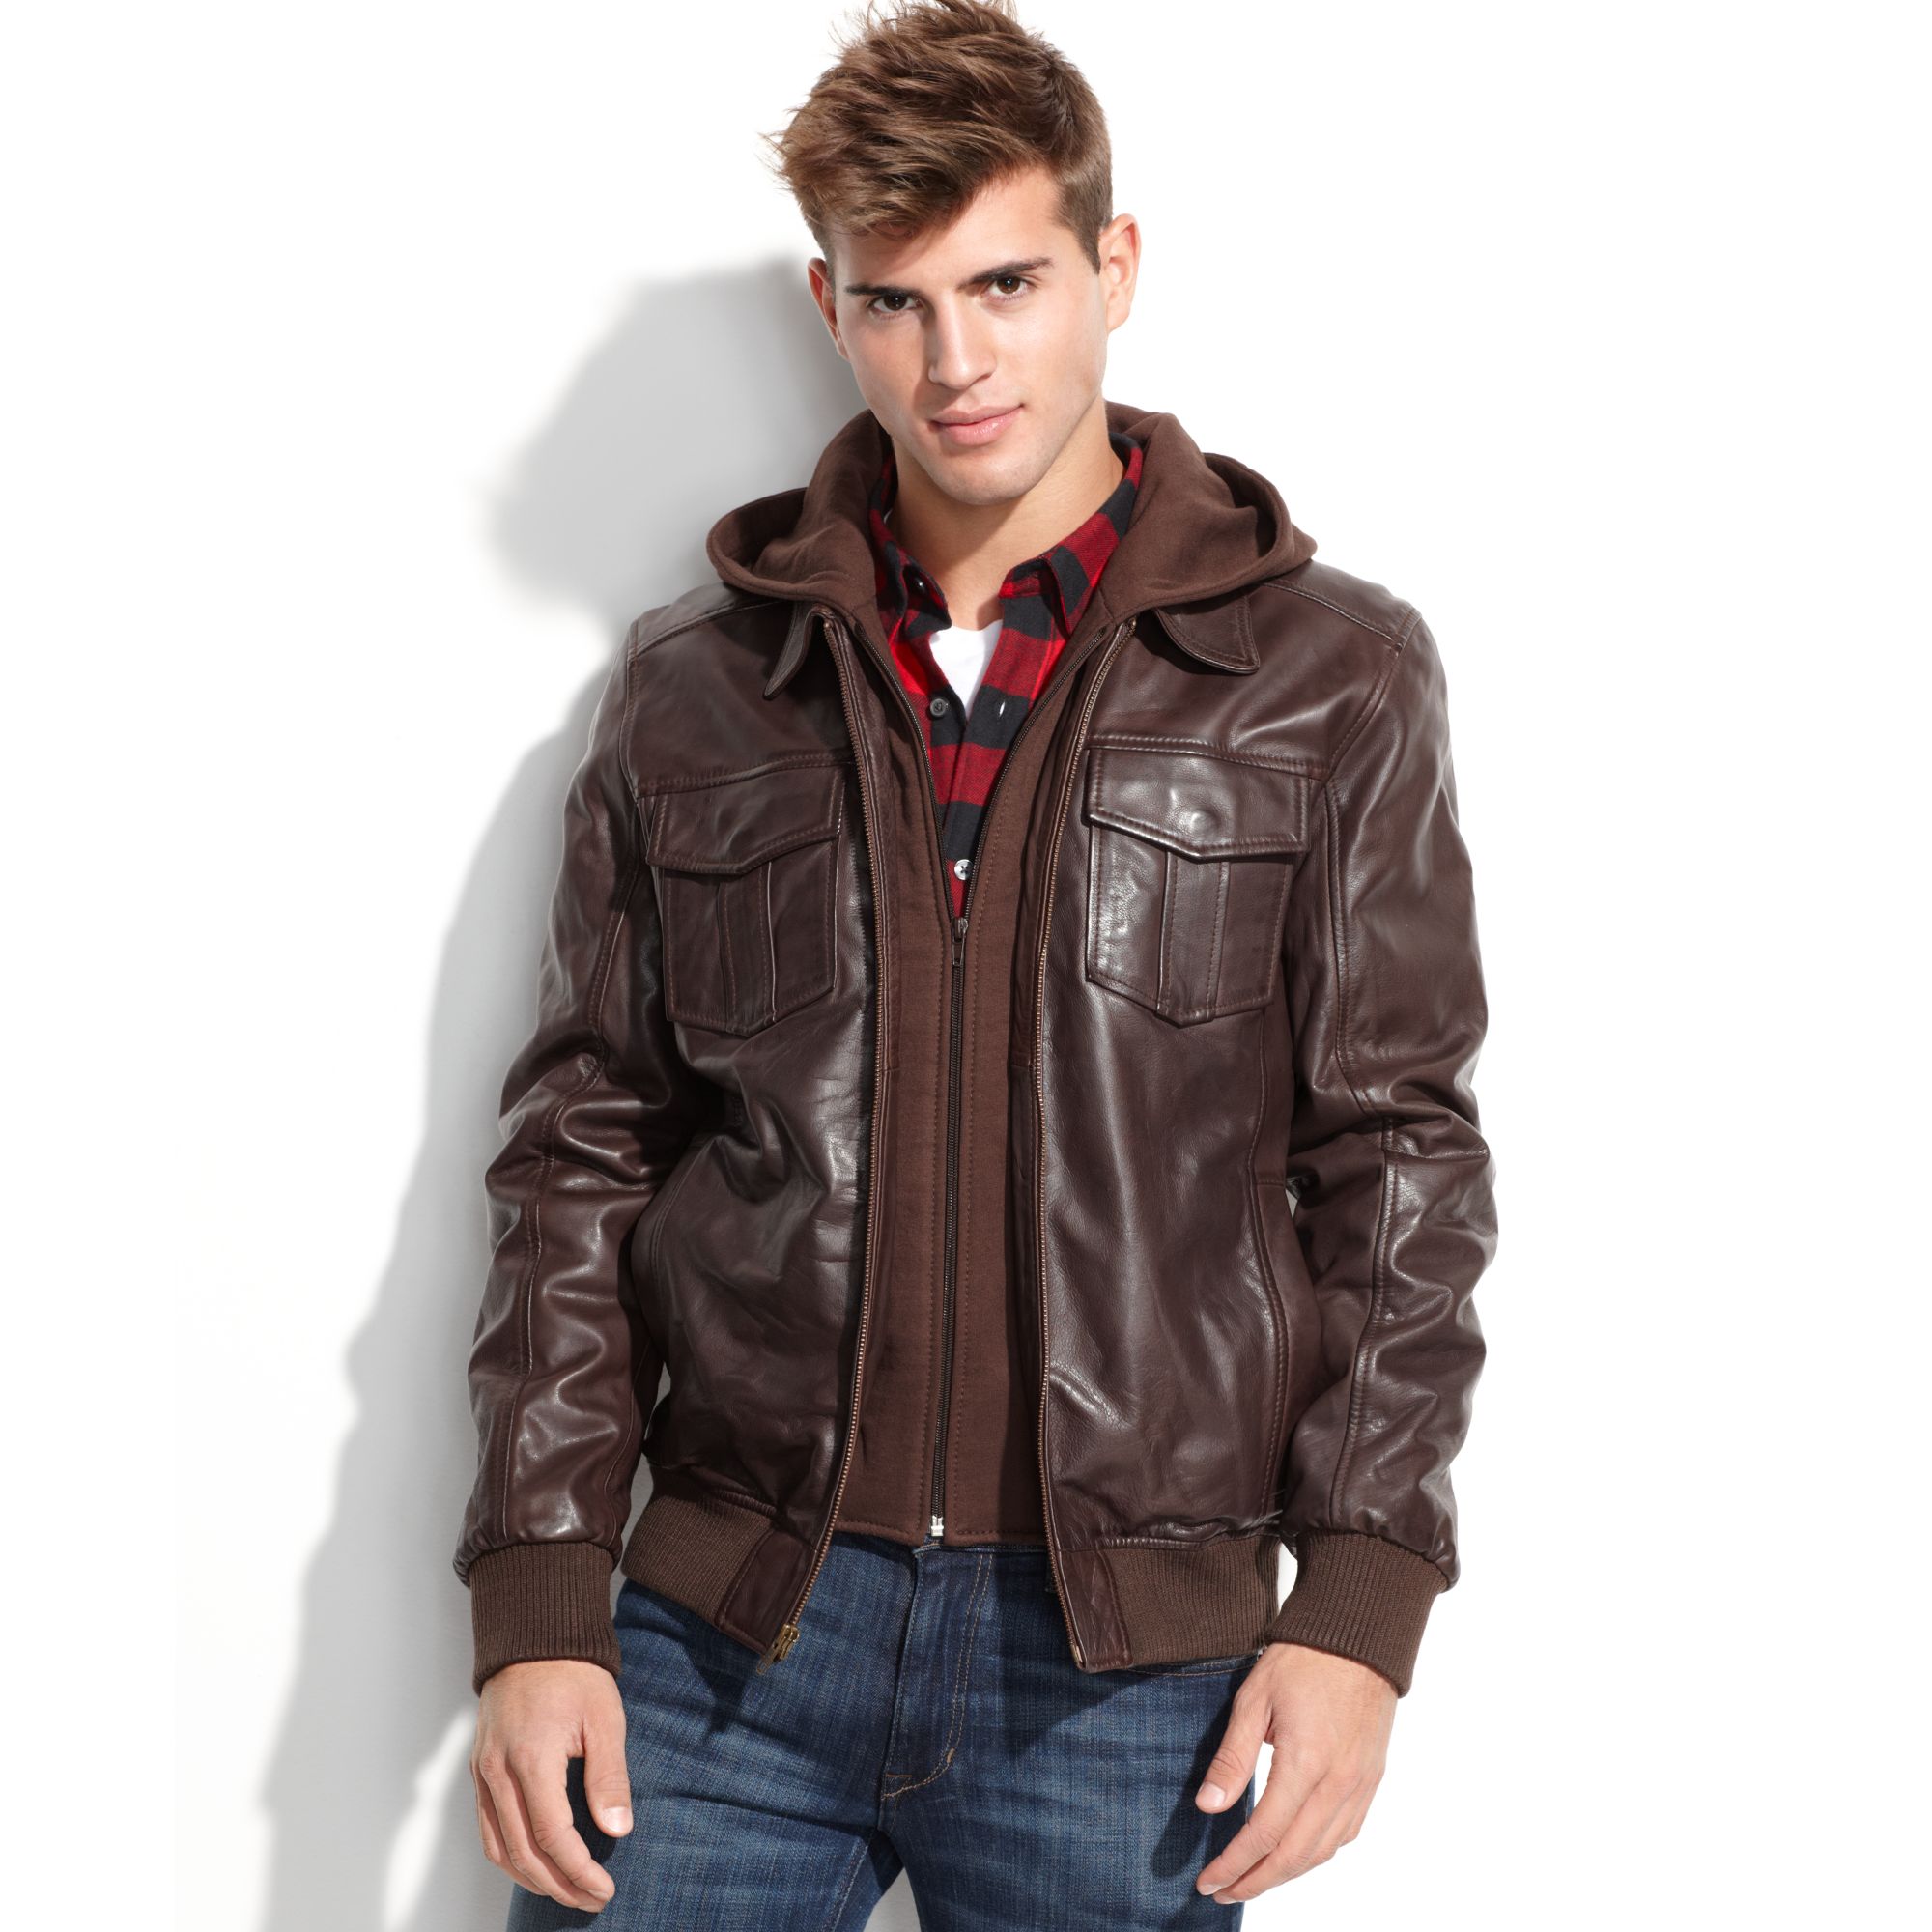 Lyst - Guess Jacket Fleece Hood Leather Bomber in Brown for Men